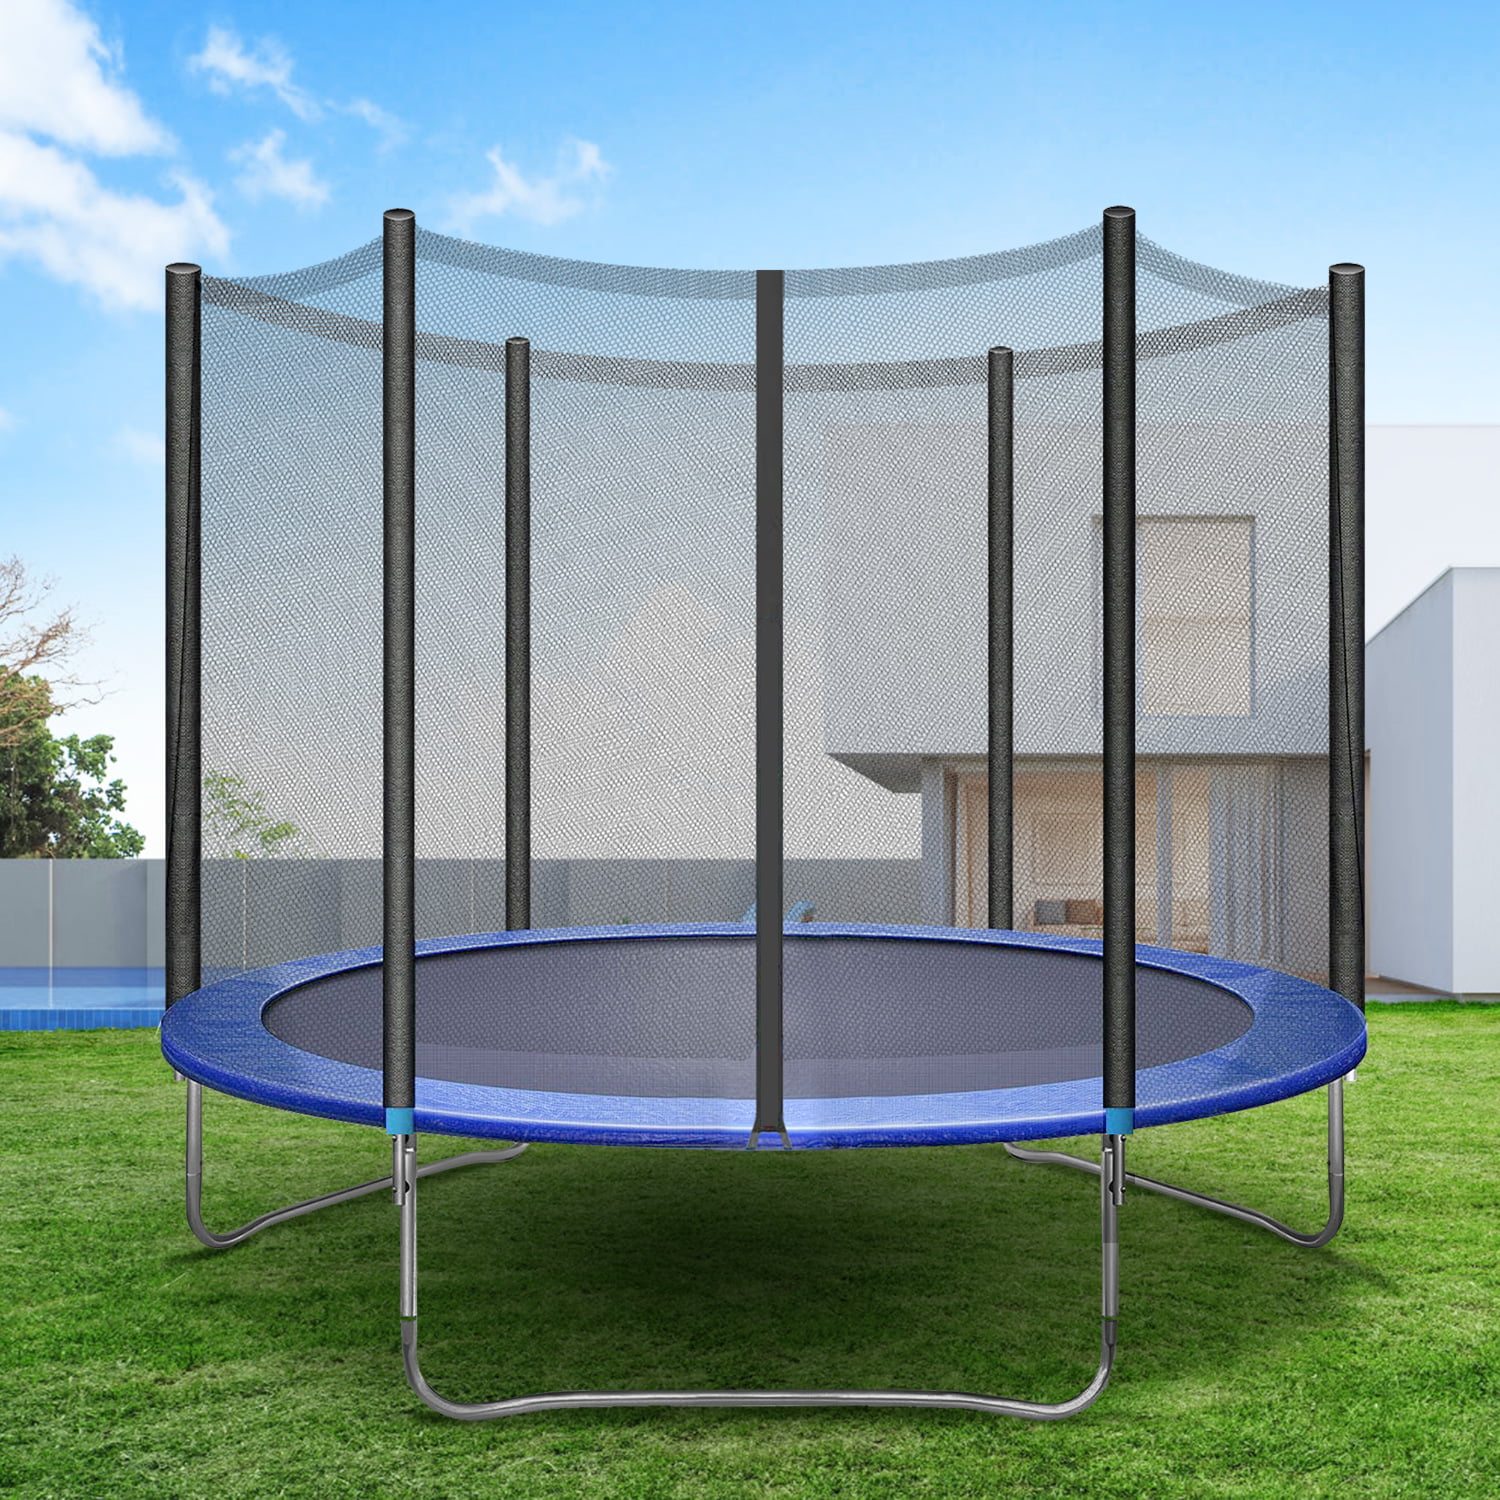 8 FT Kids Trampoline With Enclosure Net Jumping Mat And Spring Cover Padding USA 